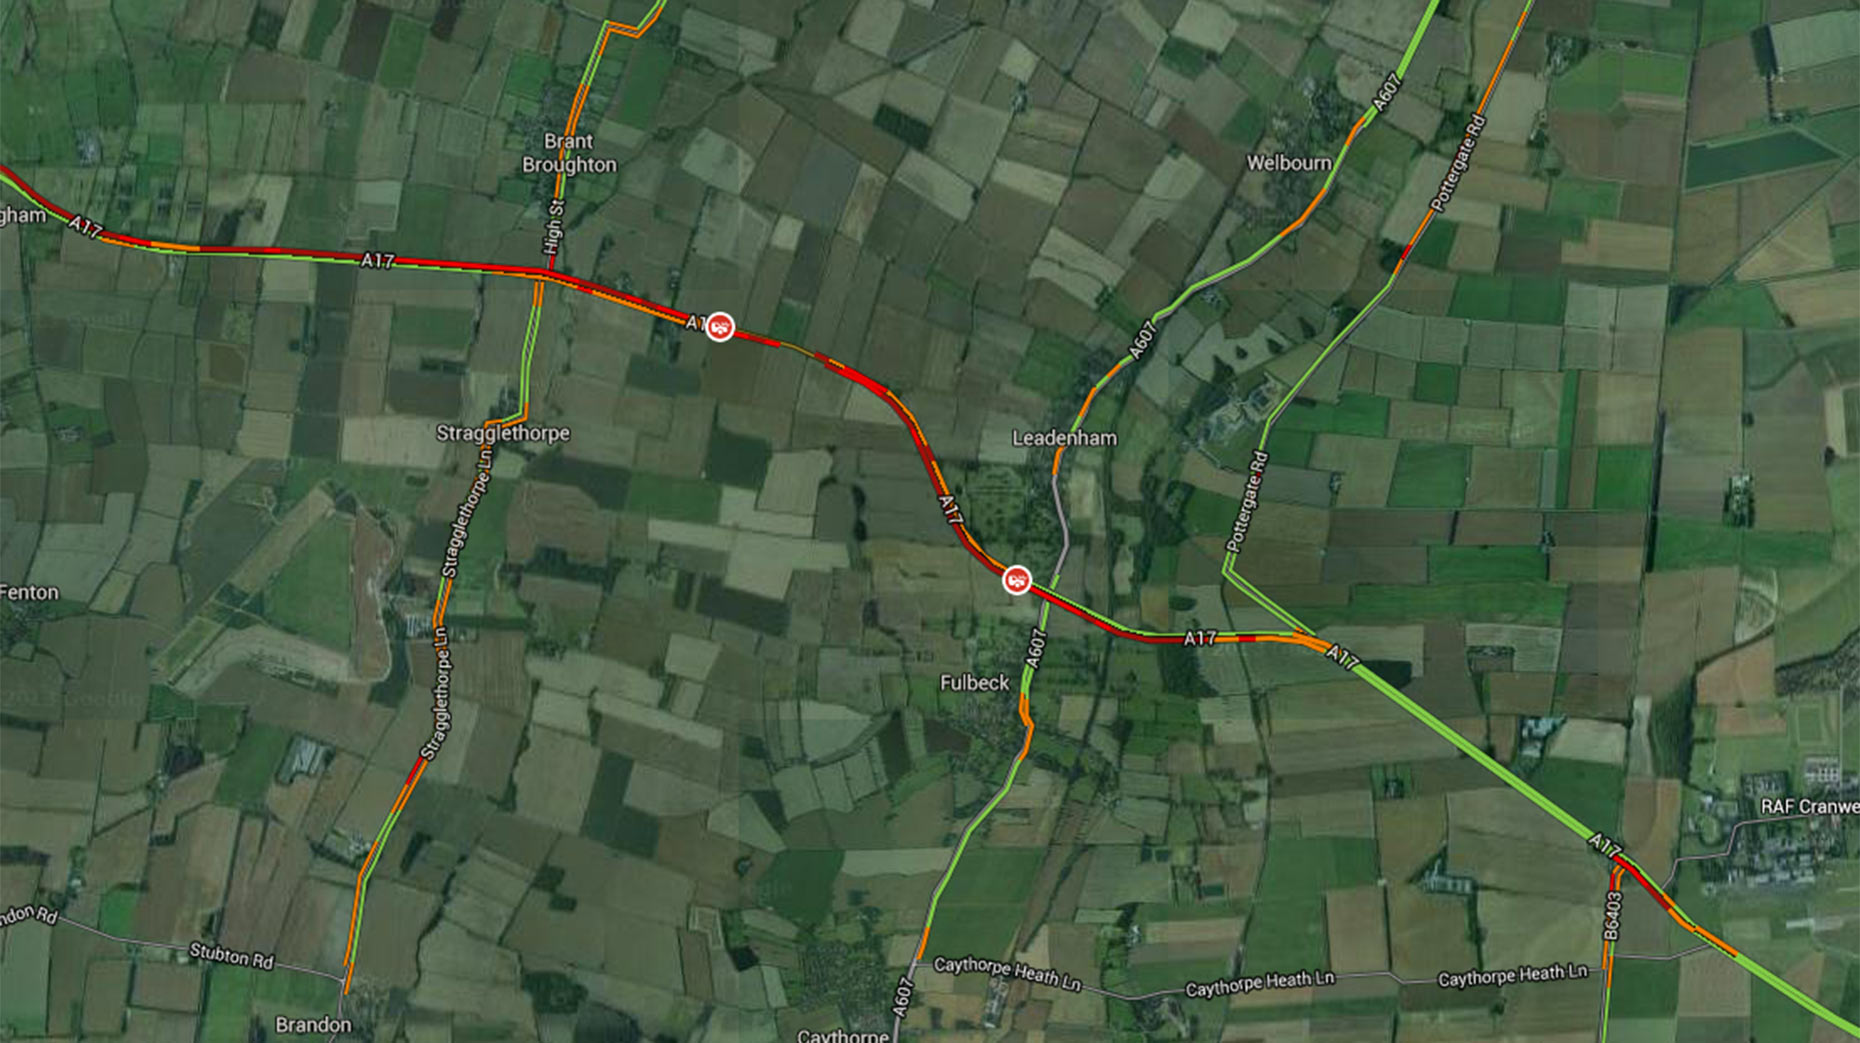 A section of the A17 will be closed for some time following the collision.